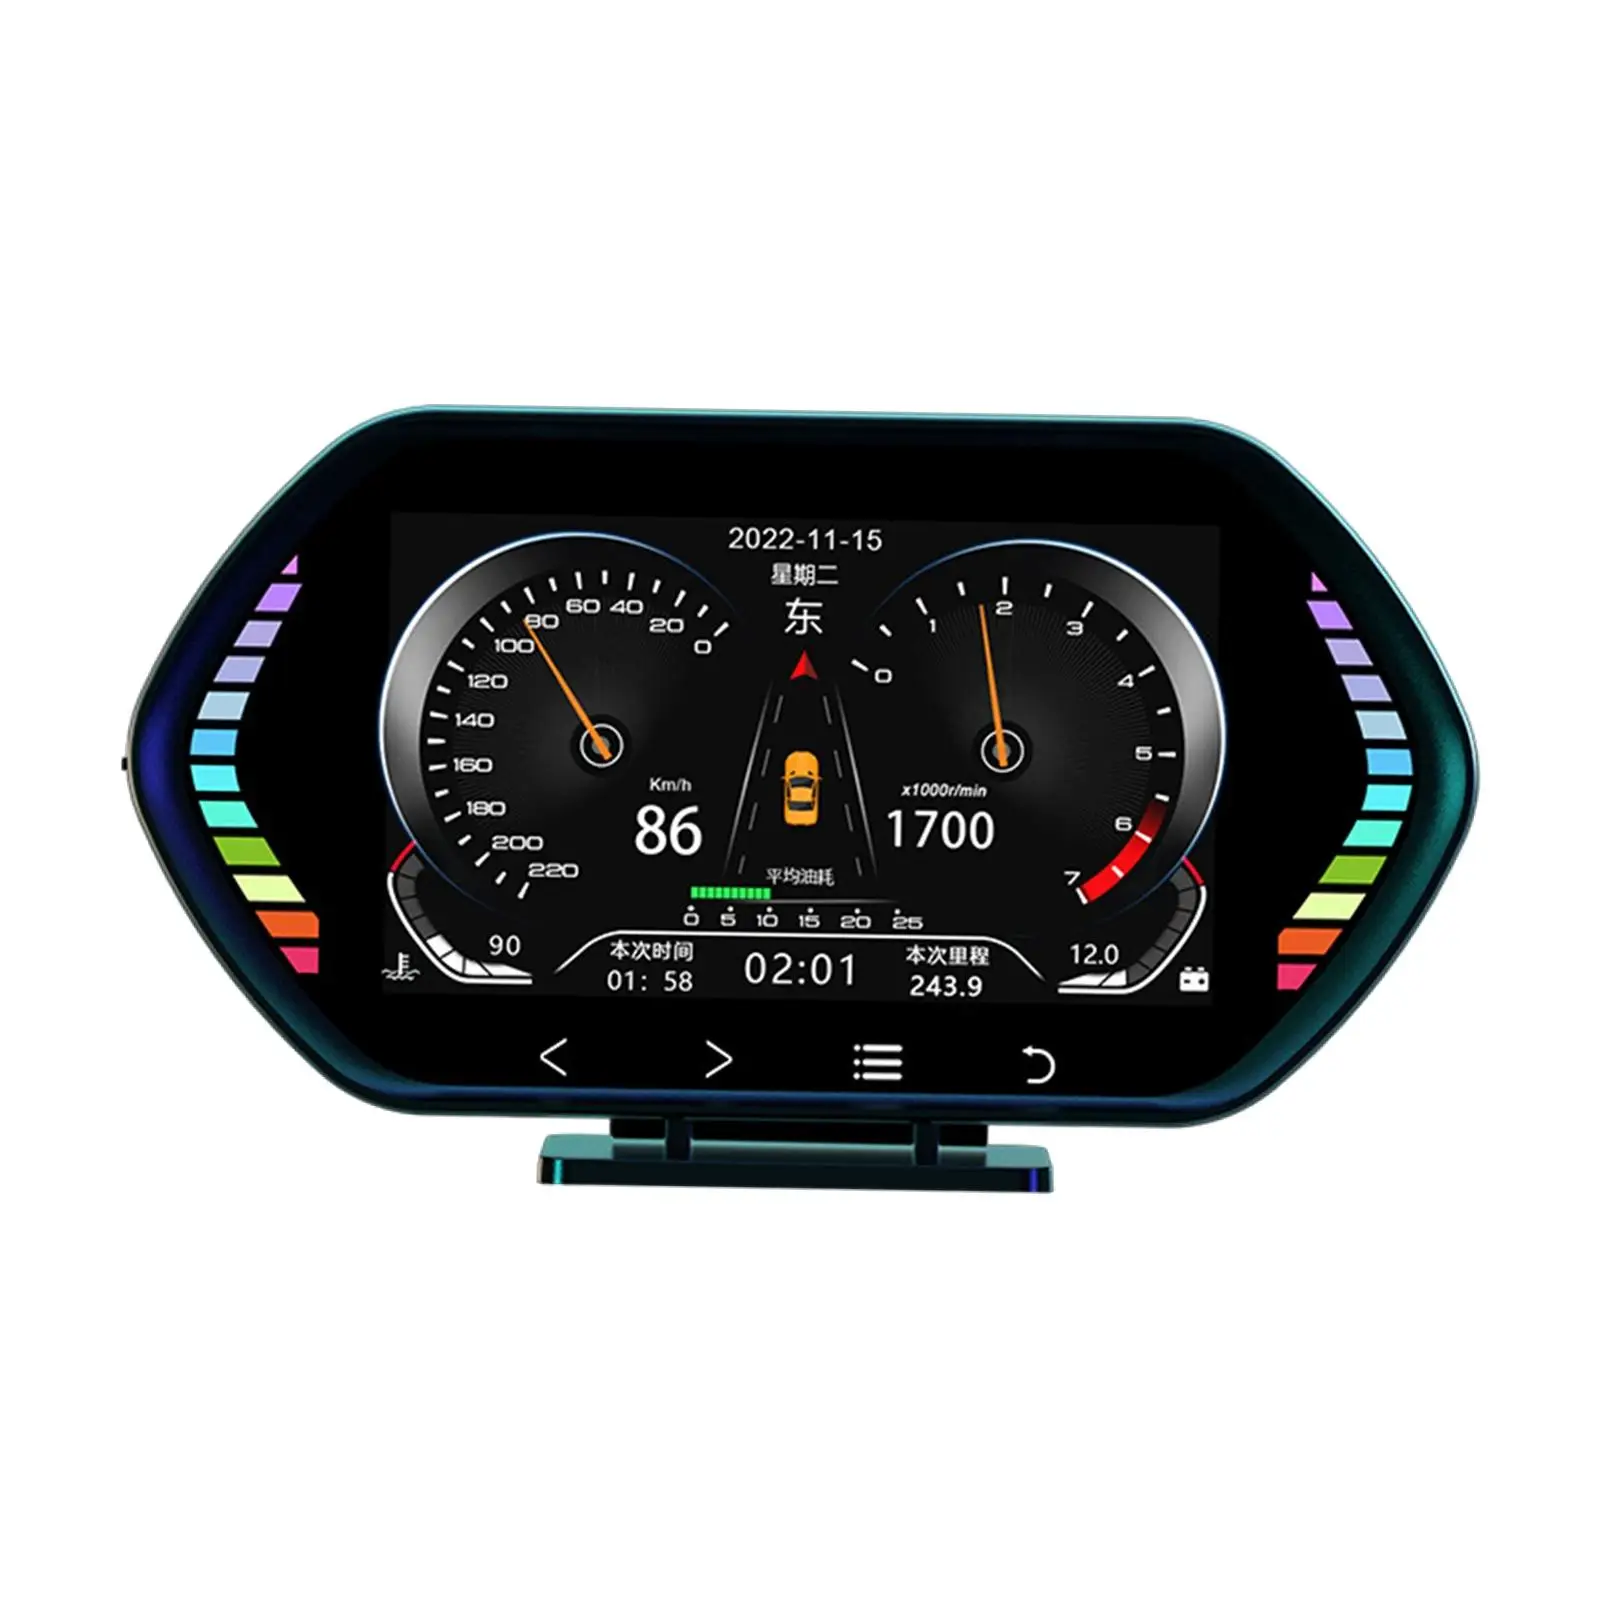 OBD2 Gauge Display 4.5inch OBD LCD Display with Ambient Light Digital Speedometer Head up Display for Most Vehicles Cars